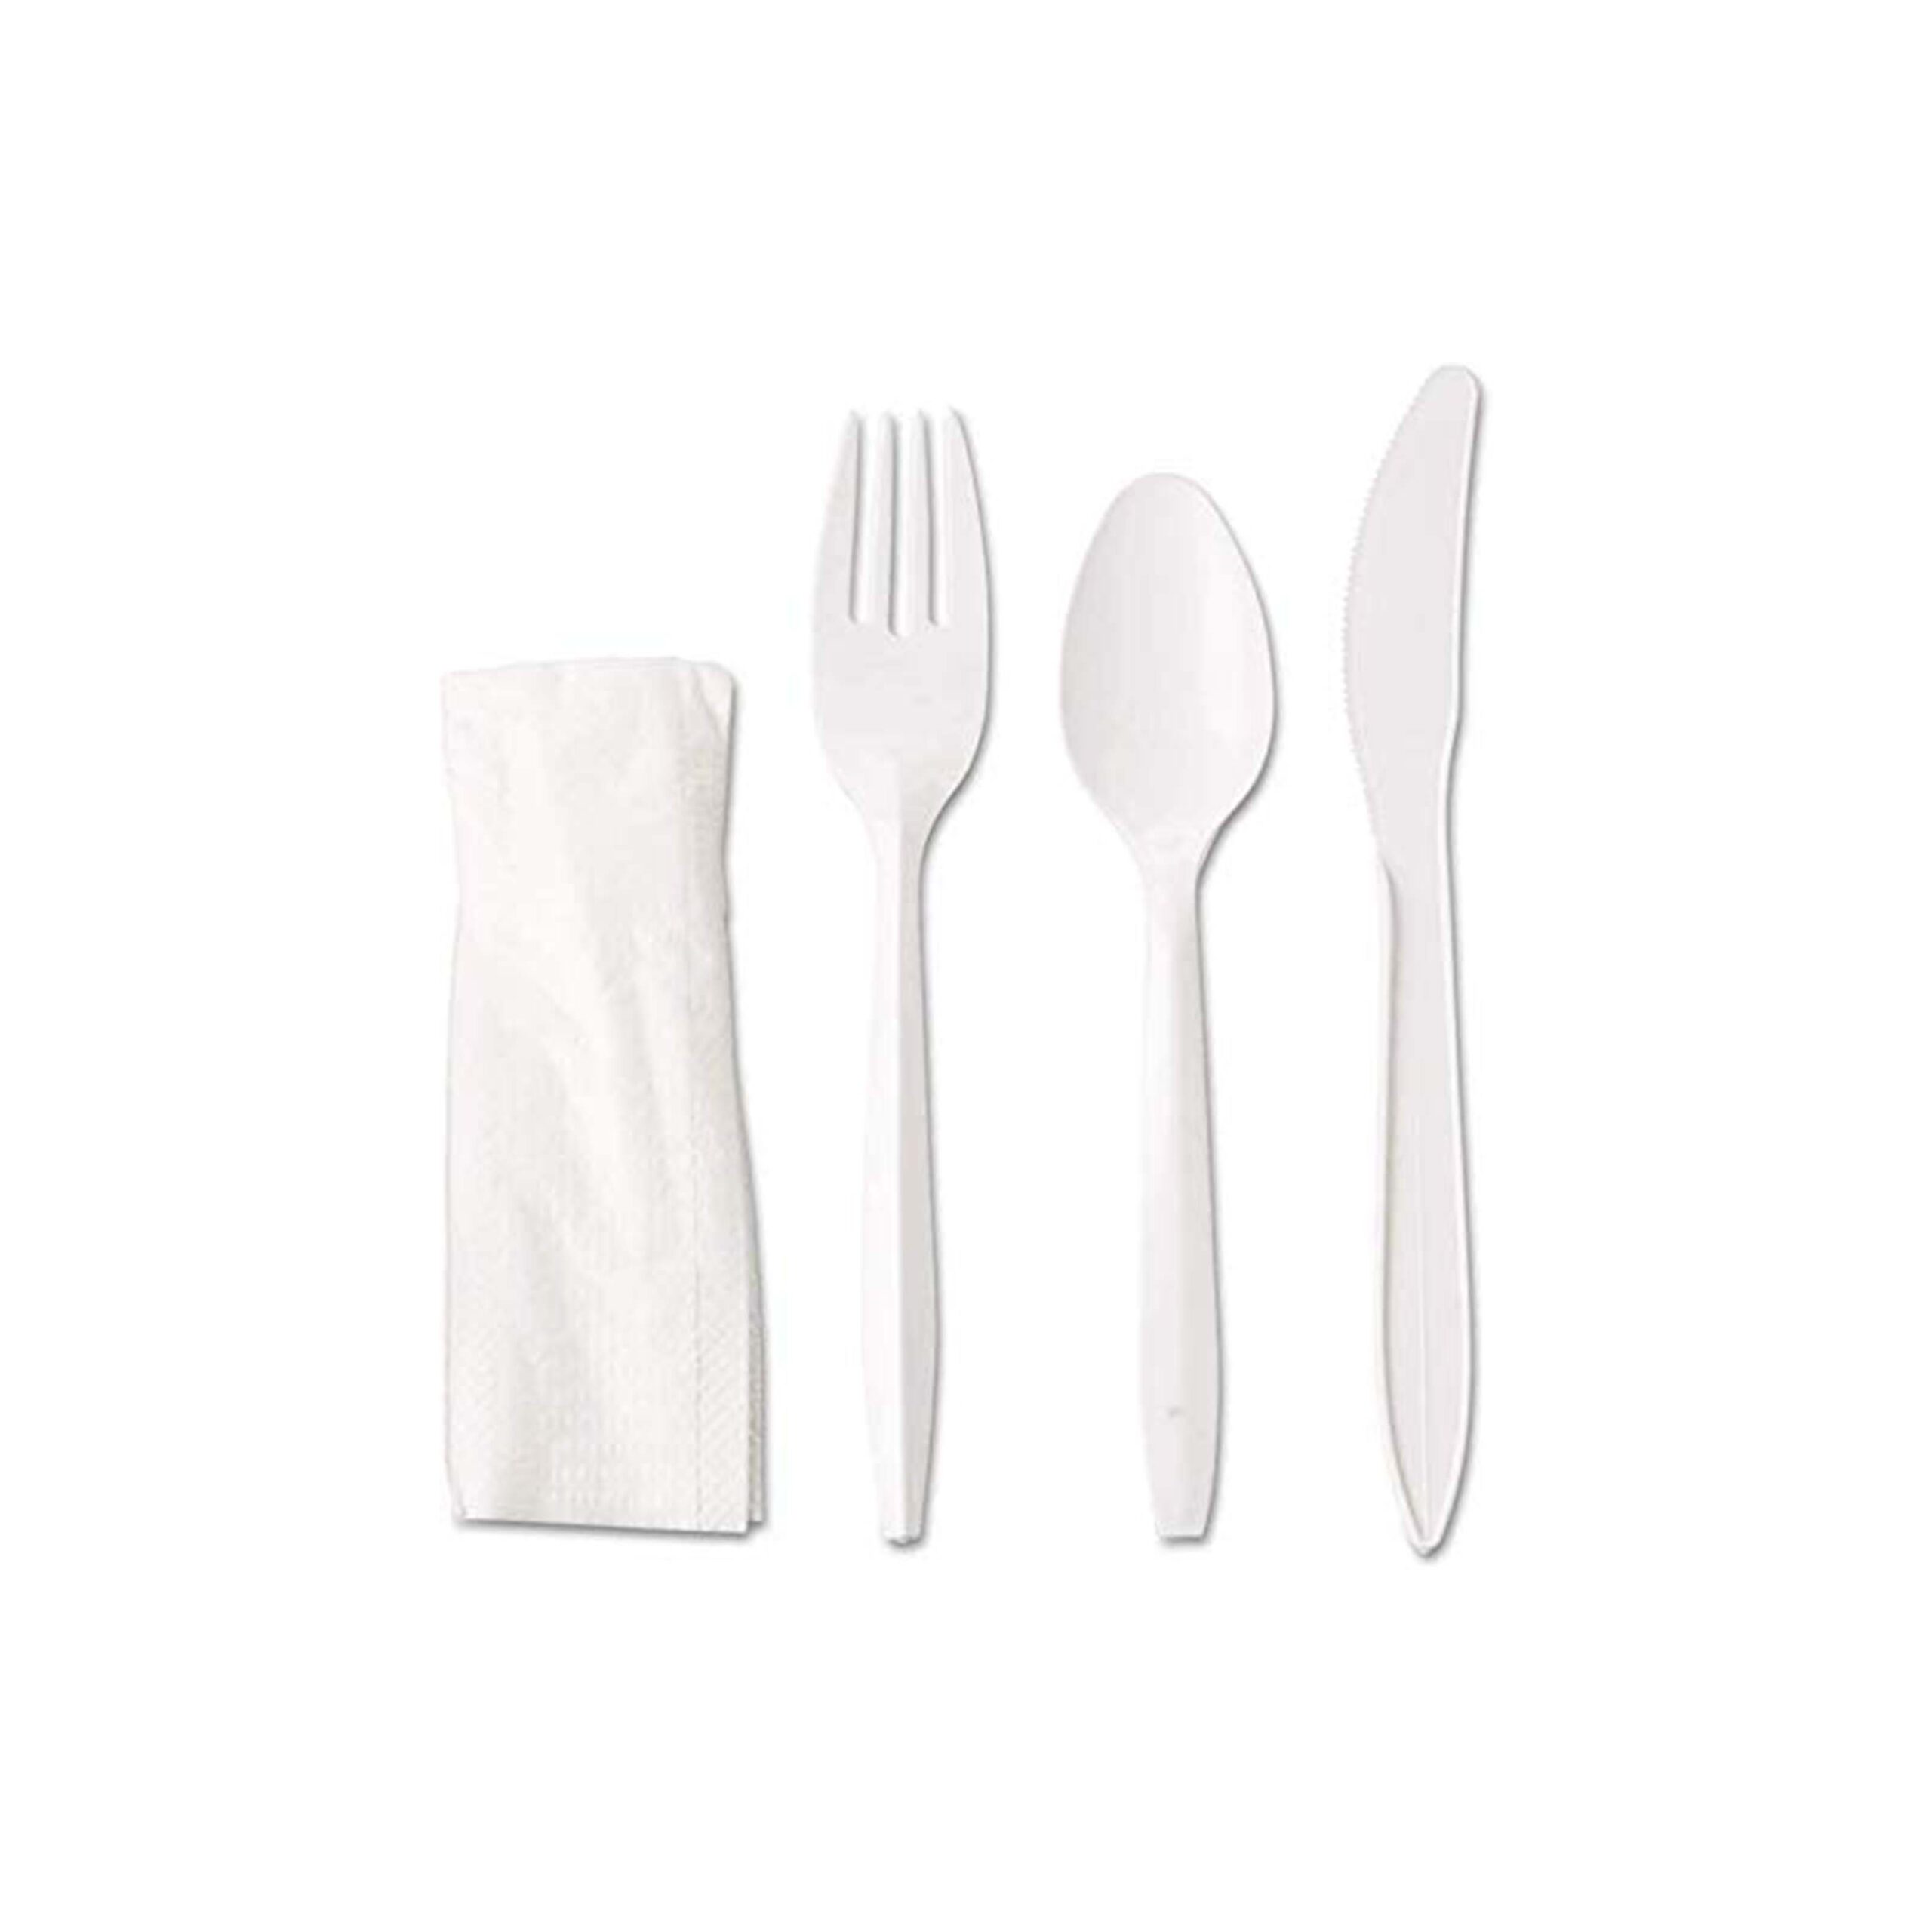 06. Cutlery Set 4in 1 White scaled